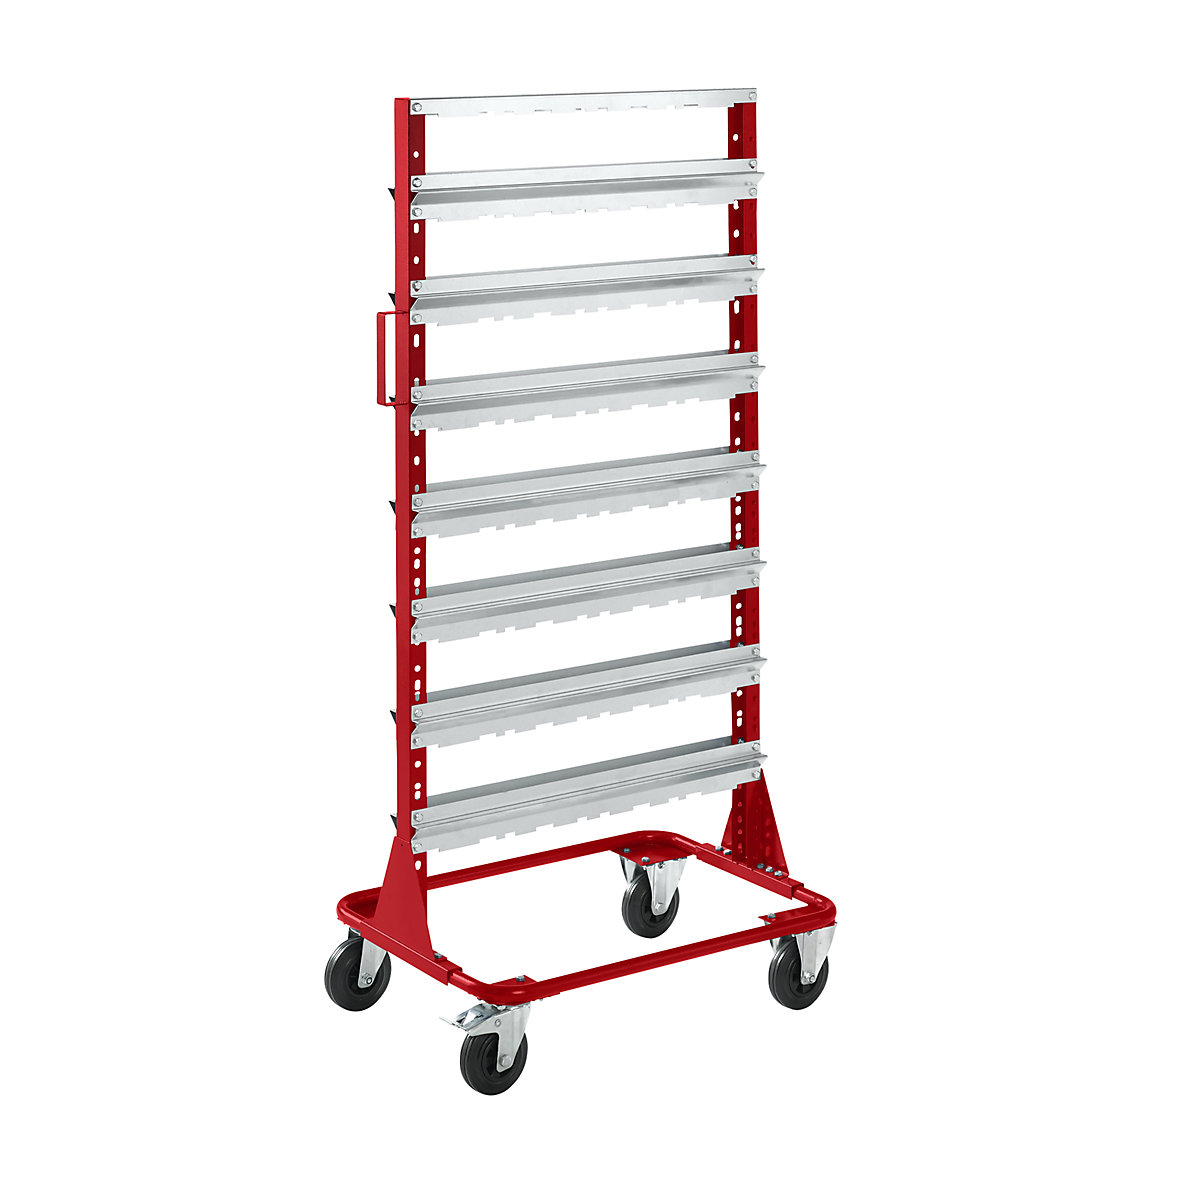 Mobile rack, height 1588 mm, mobile rack for 56 open fronted storage bins, flame red-3